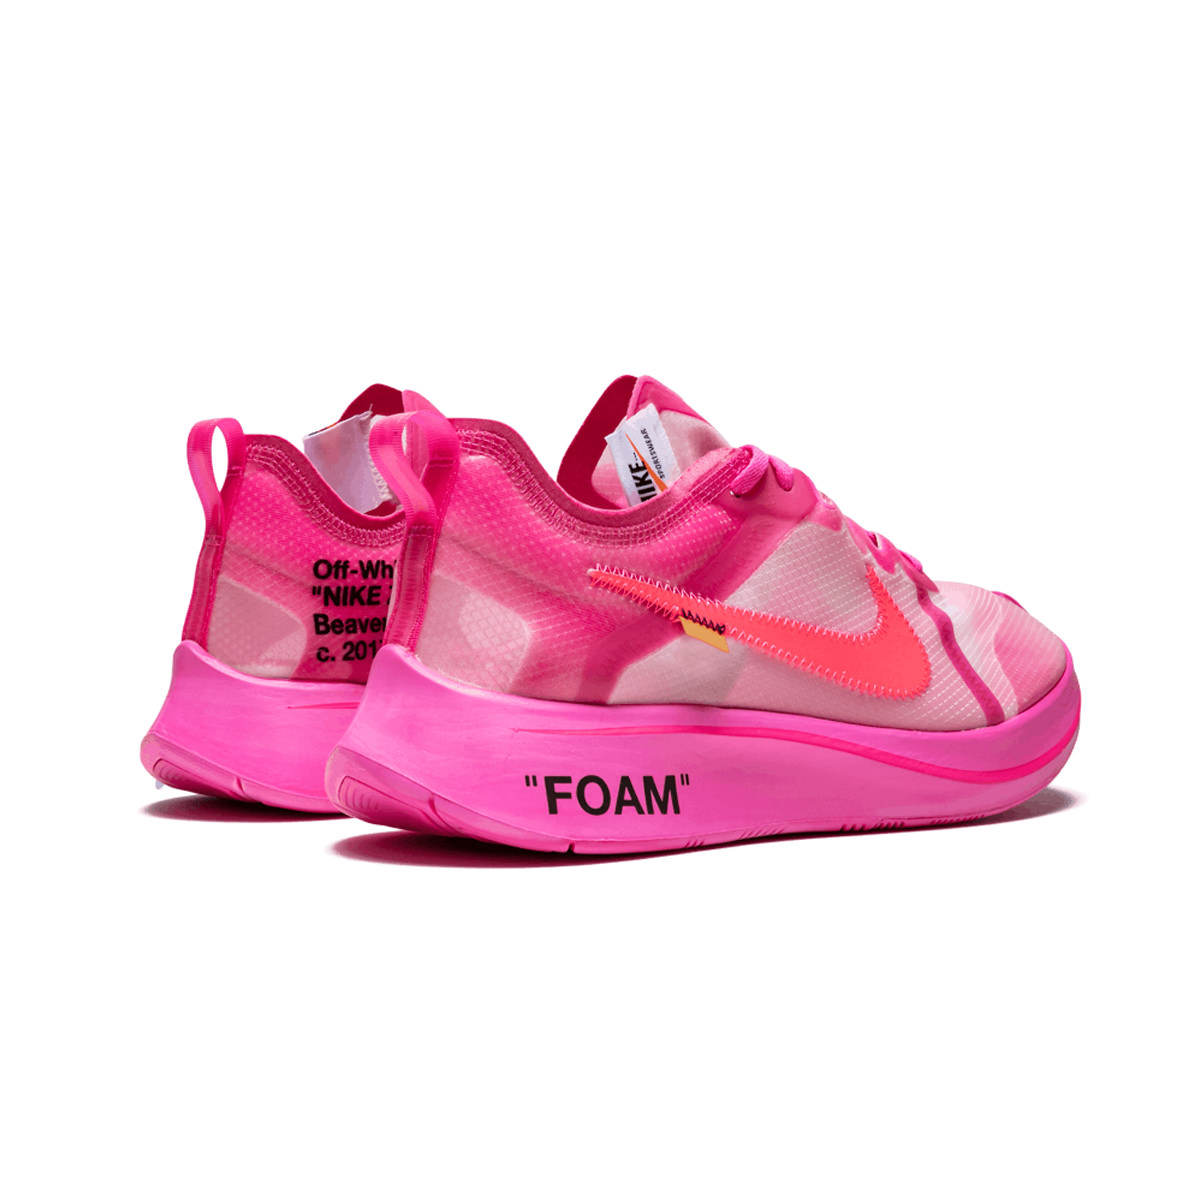 Nike Zoom Fly Off-White Tulip PinkNike Zoom Fly Off-White Tulip Pink ...